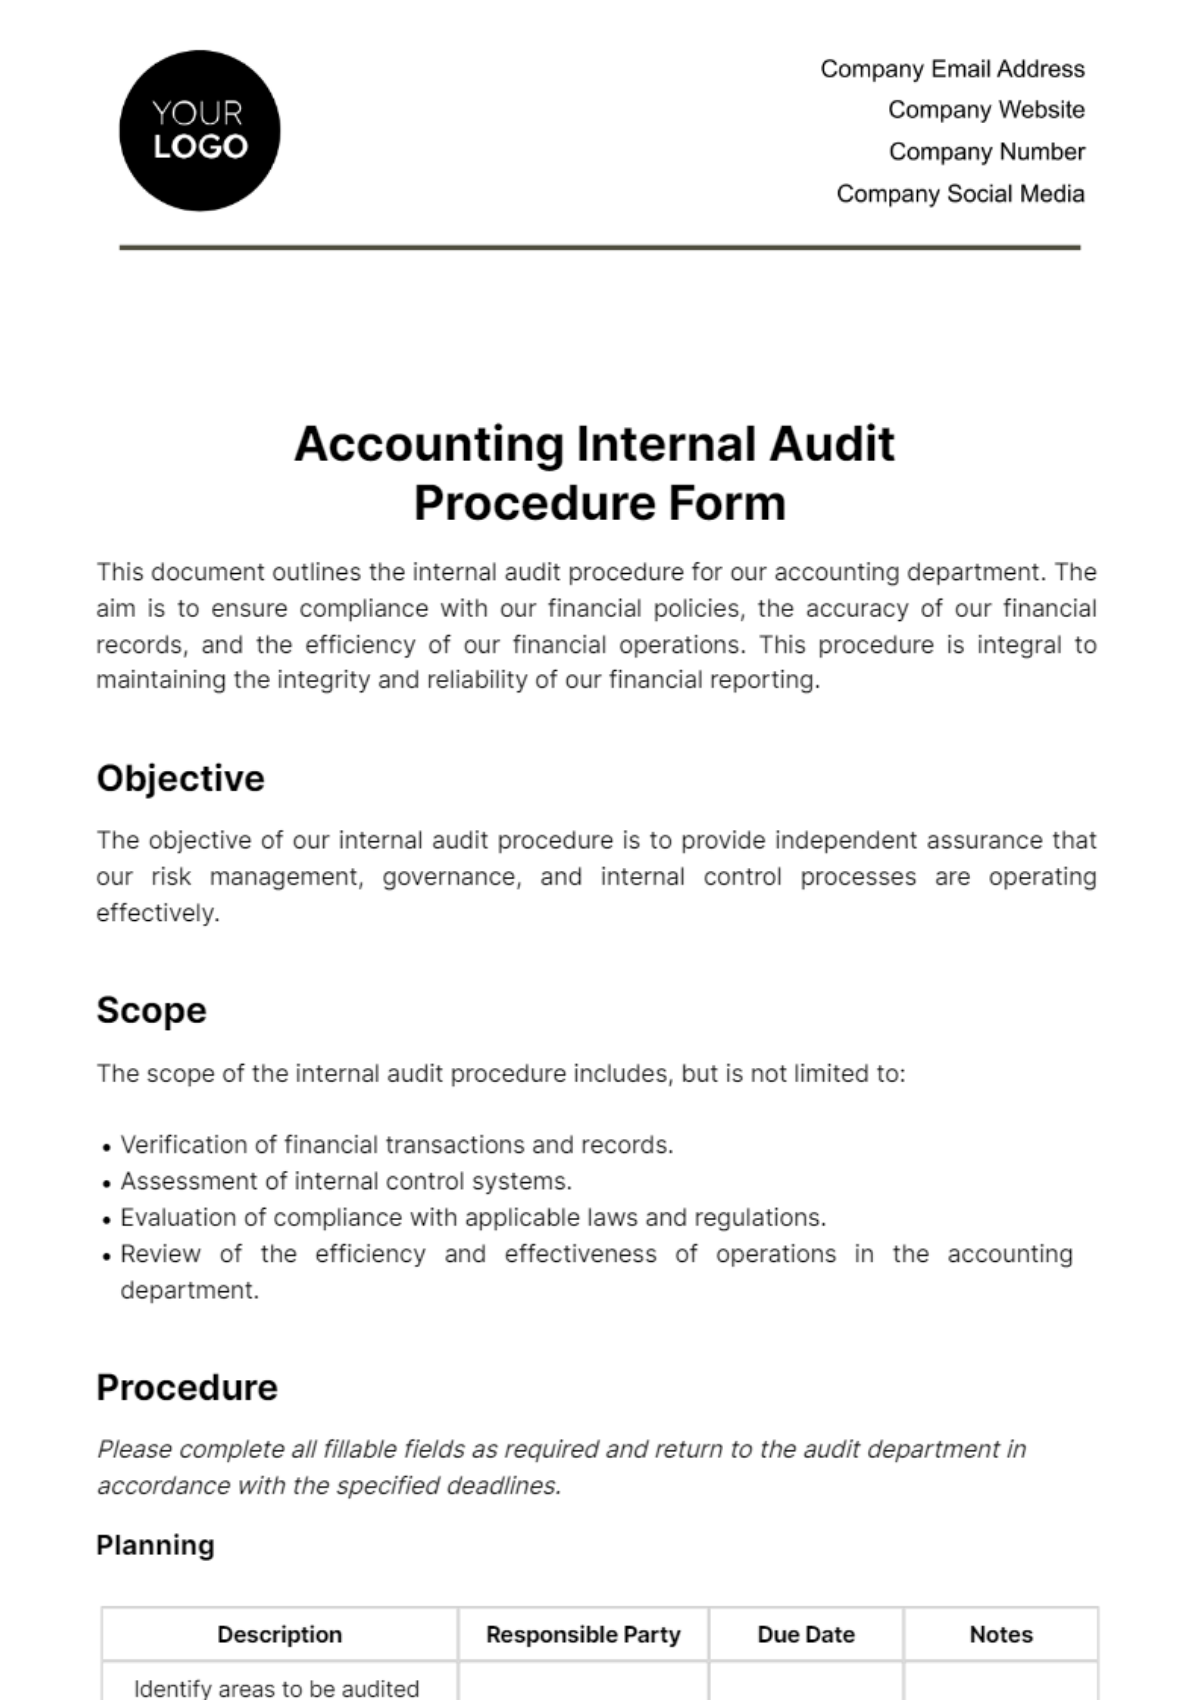 Free Accounting Internal Audit Procedure Form Template